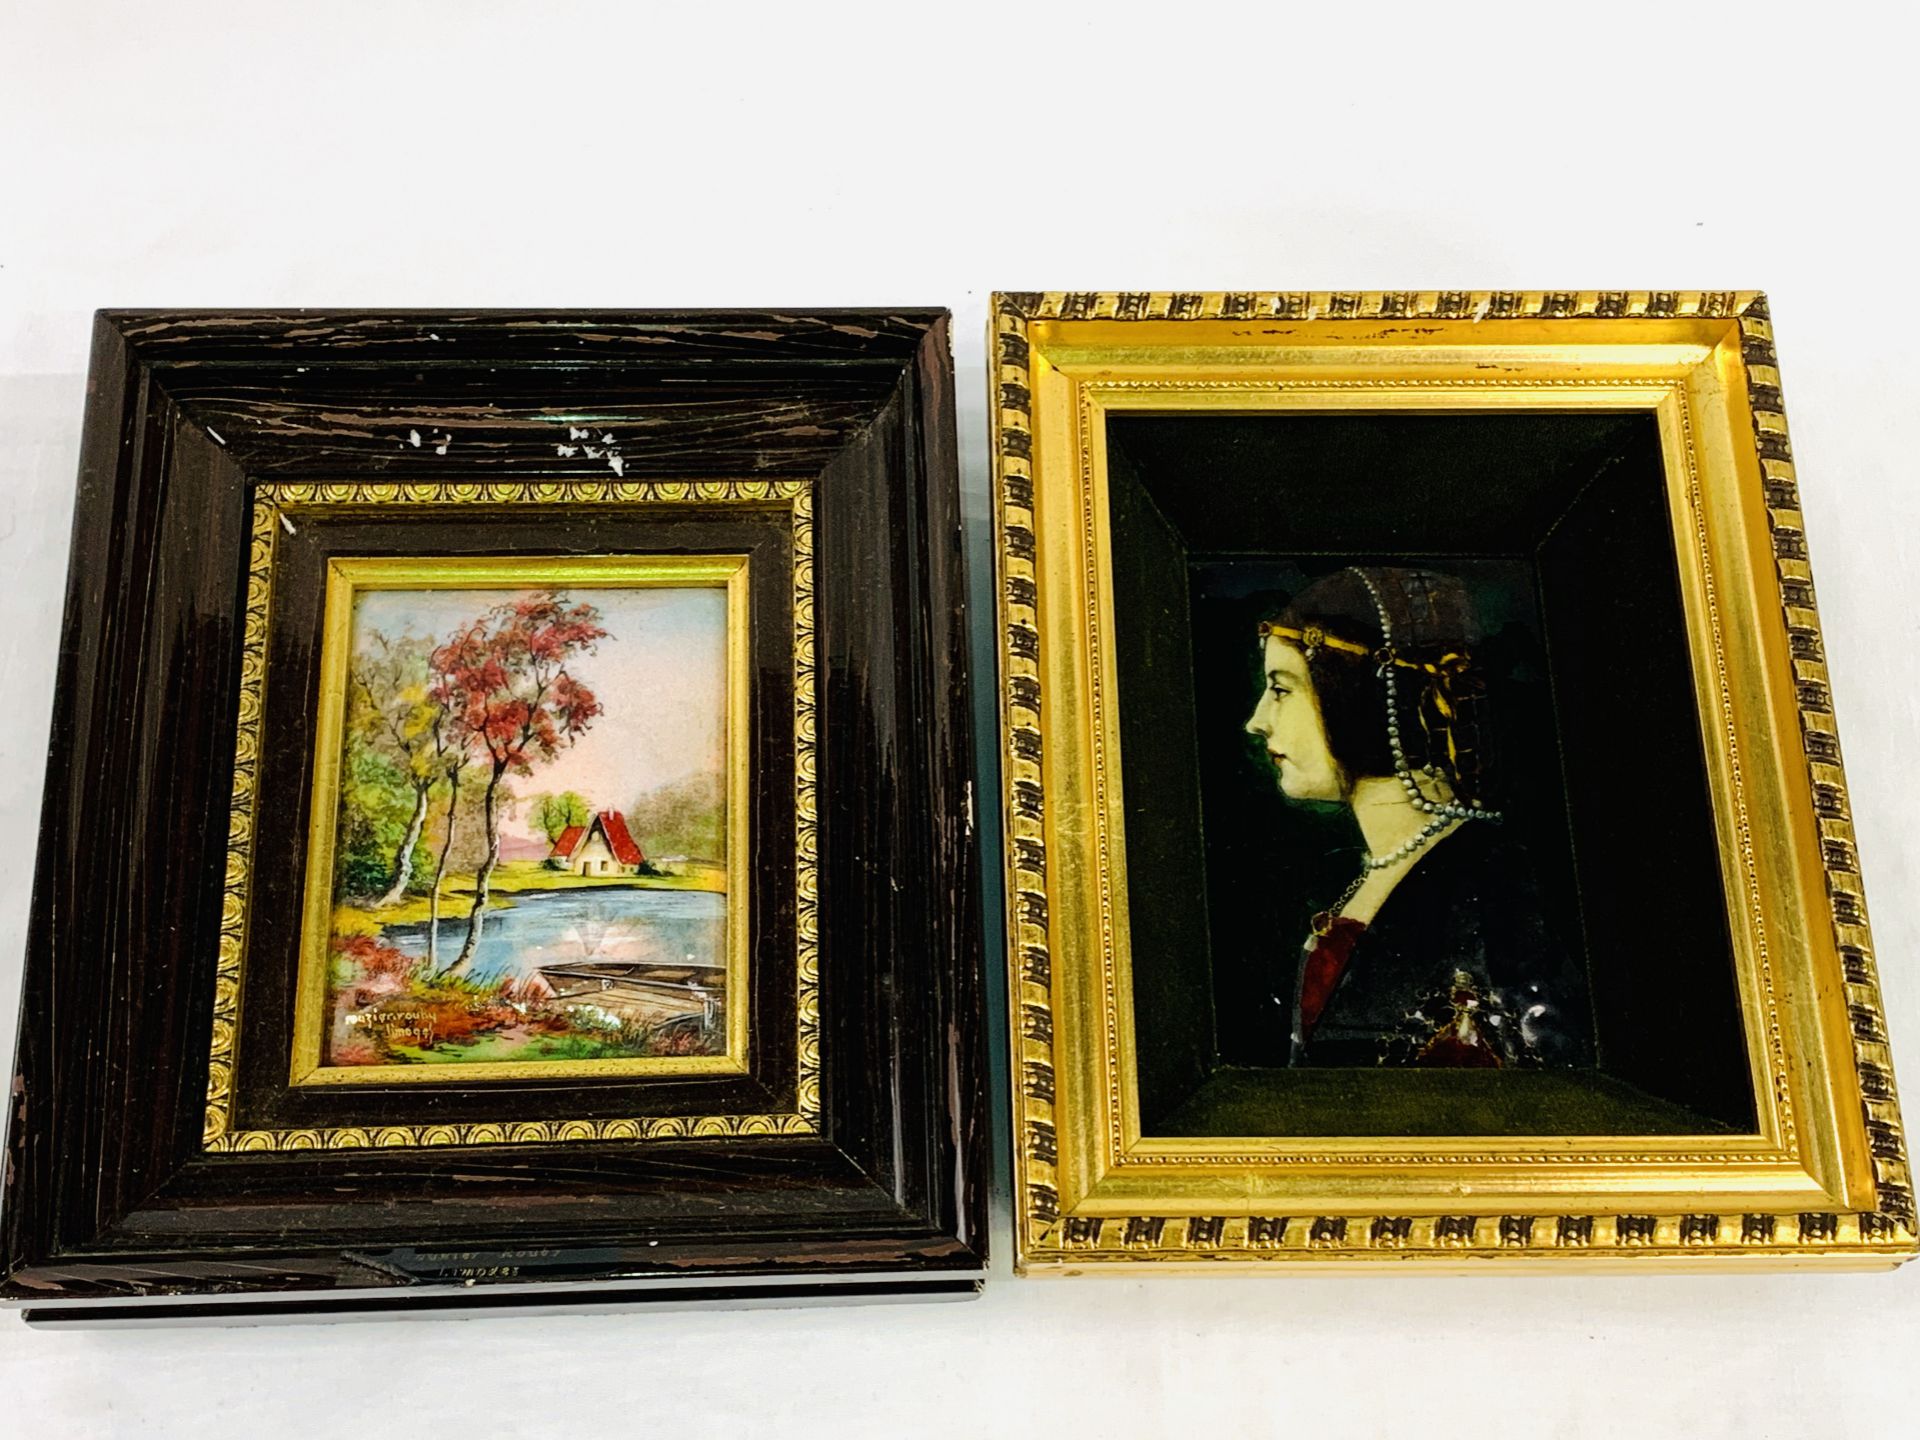 2 framed enamel placques: one signed Rouzier Rouby; the other after Giovanni Ambrogio Predis